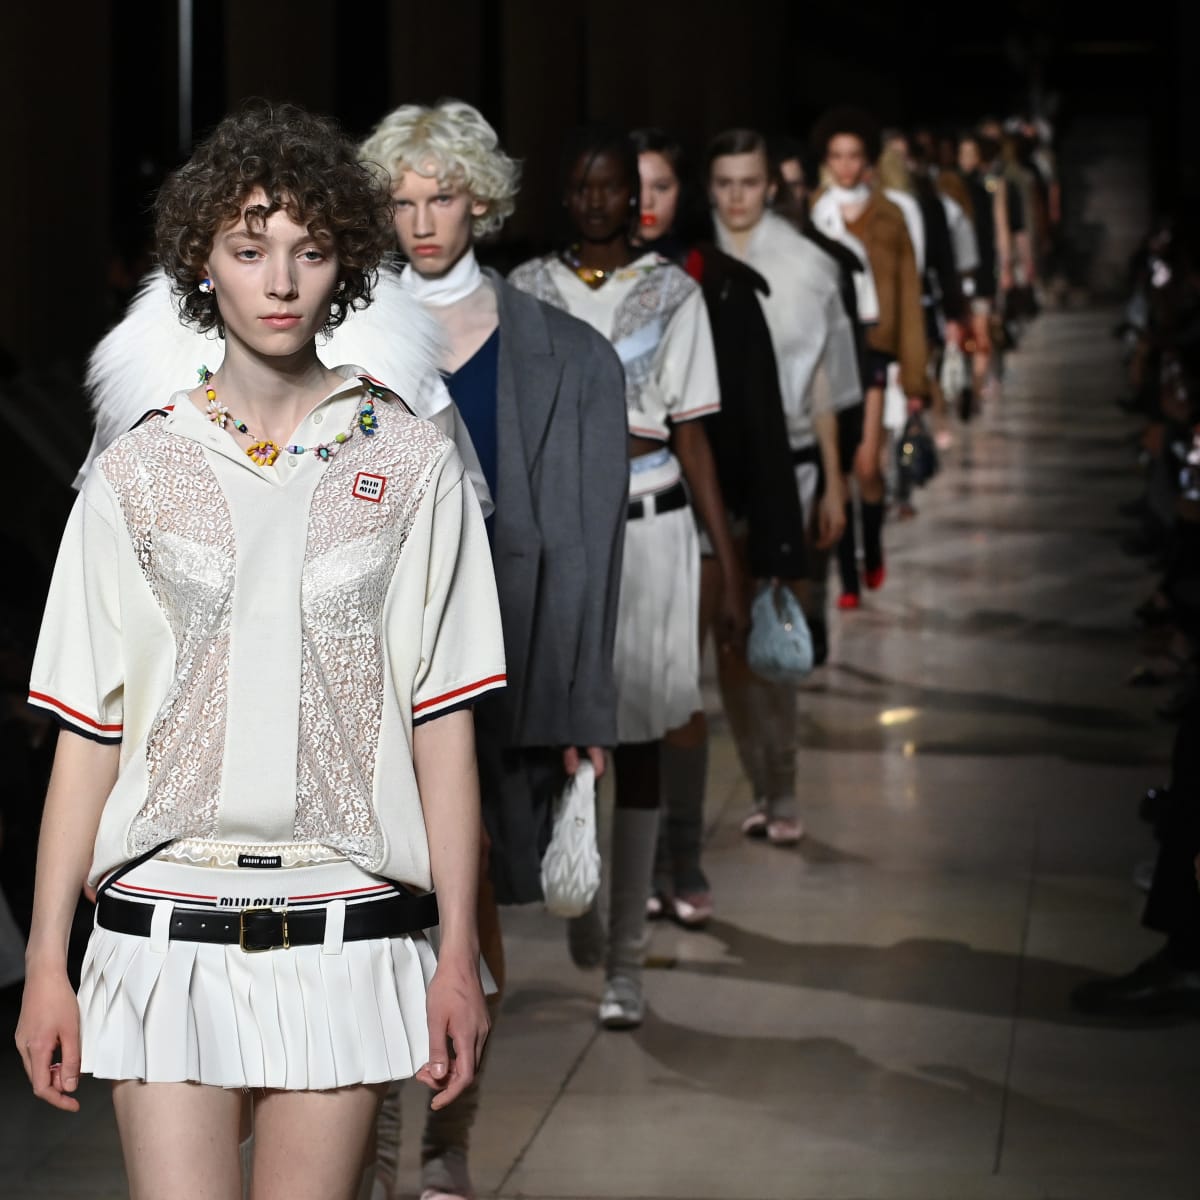 Miu Miu Transforms Normal Clothing Into Something Attractive and